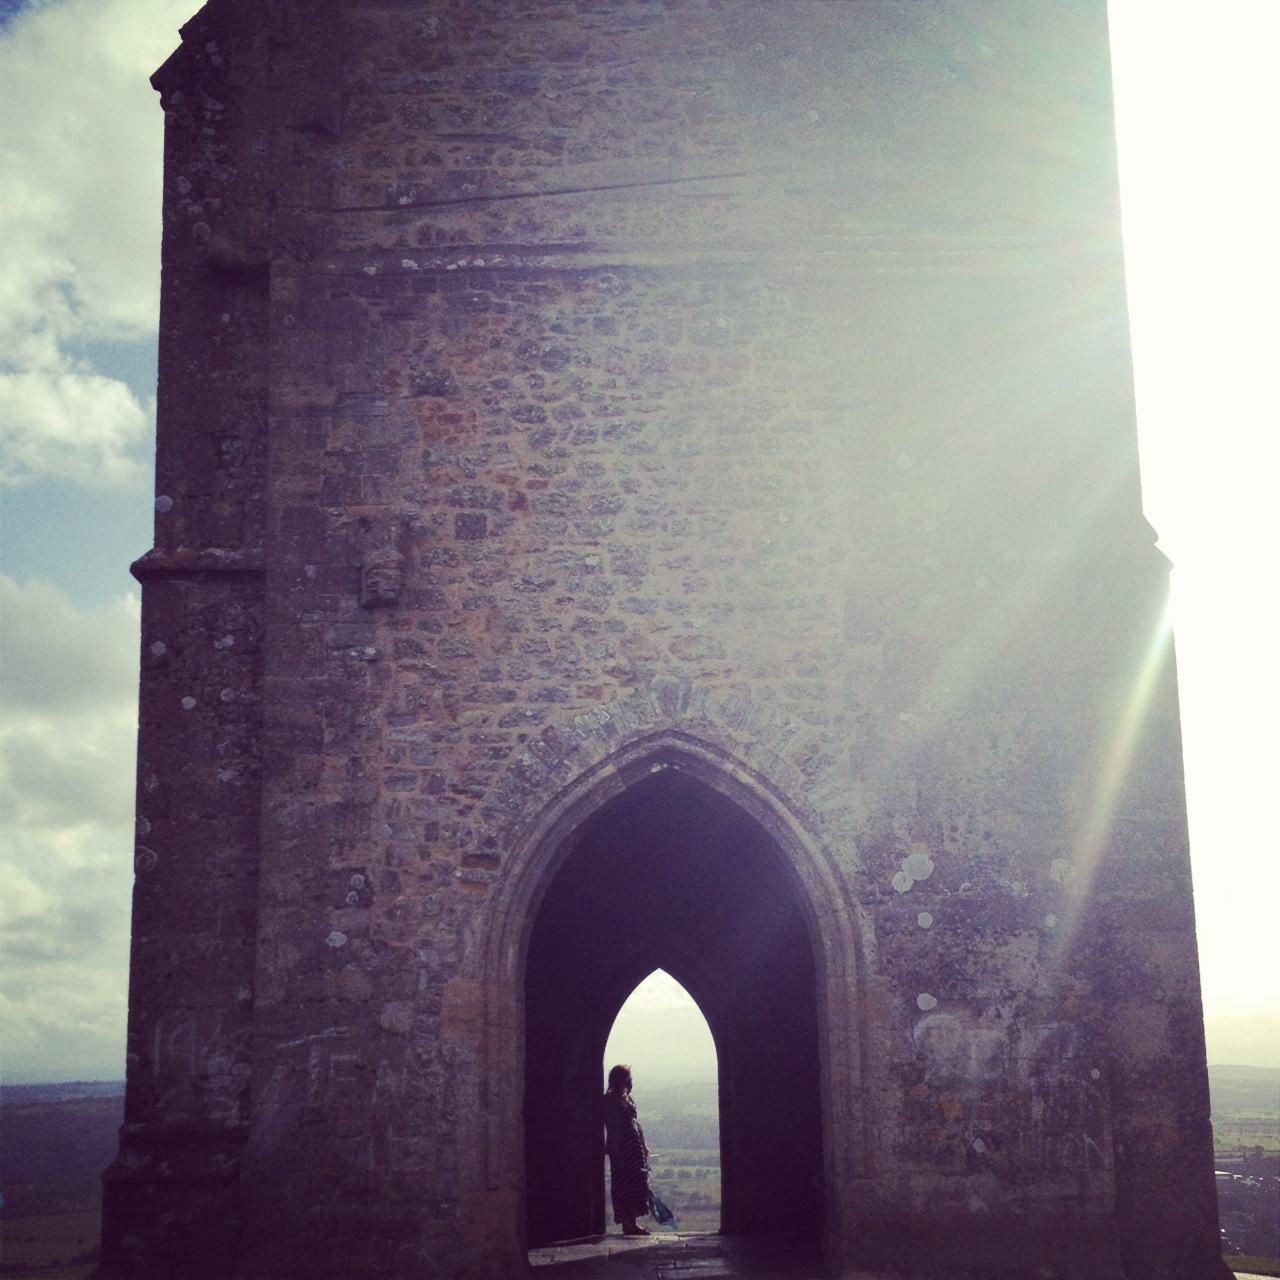  Looking out from the Tor in Glastonbury, England 